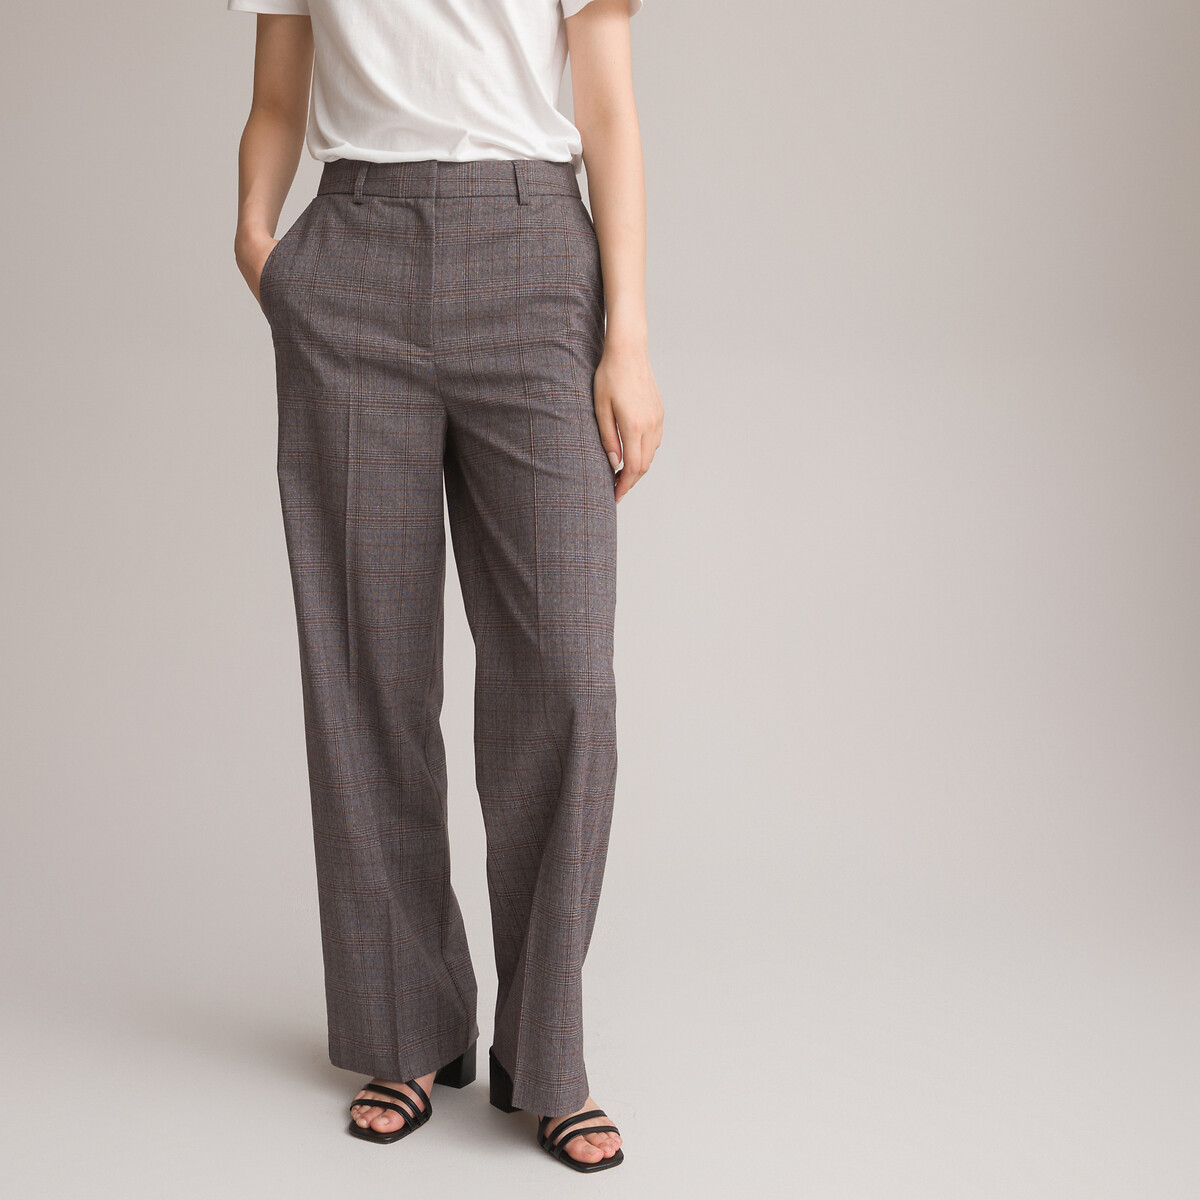 Wide leg trousers in prince of wales check, length 31.5